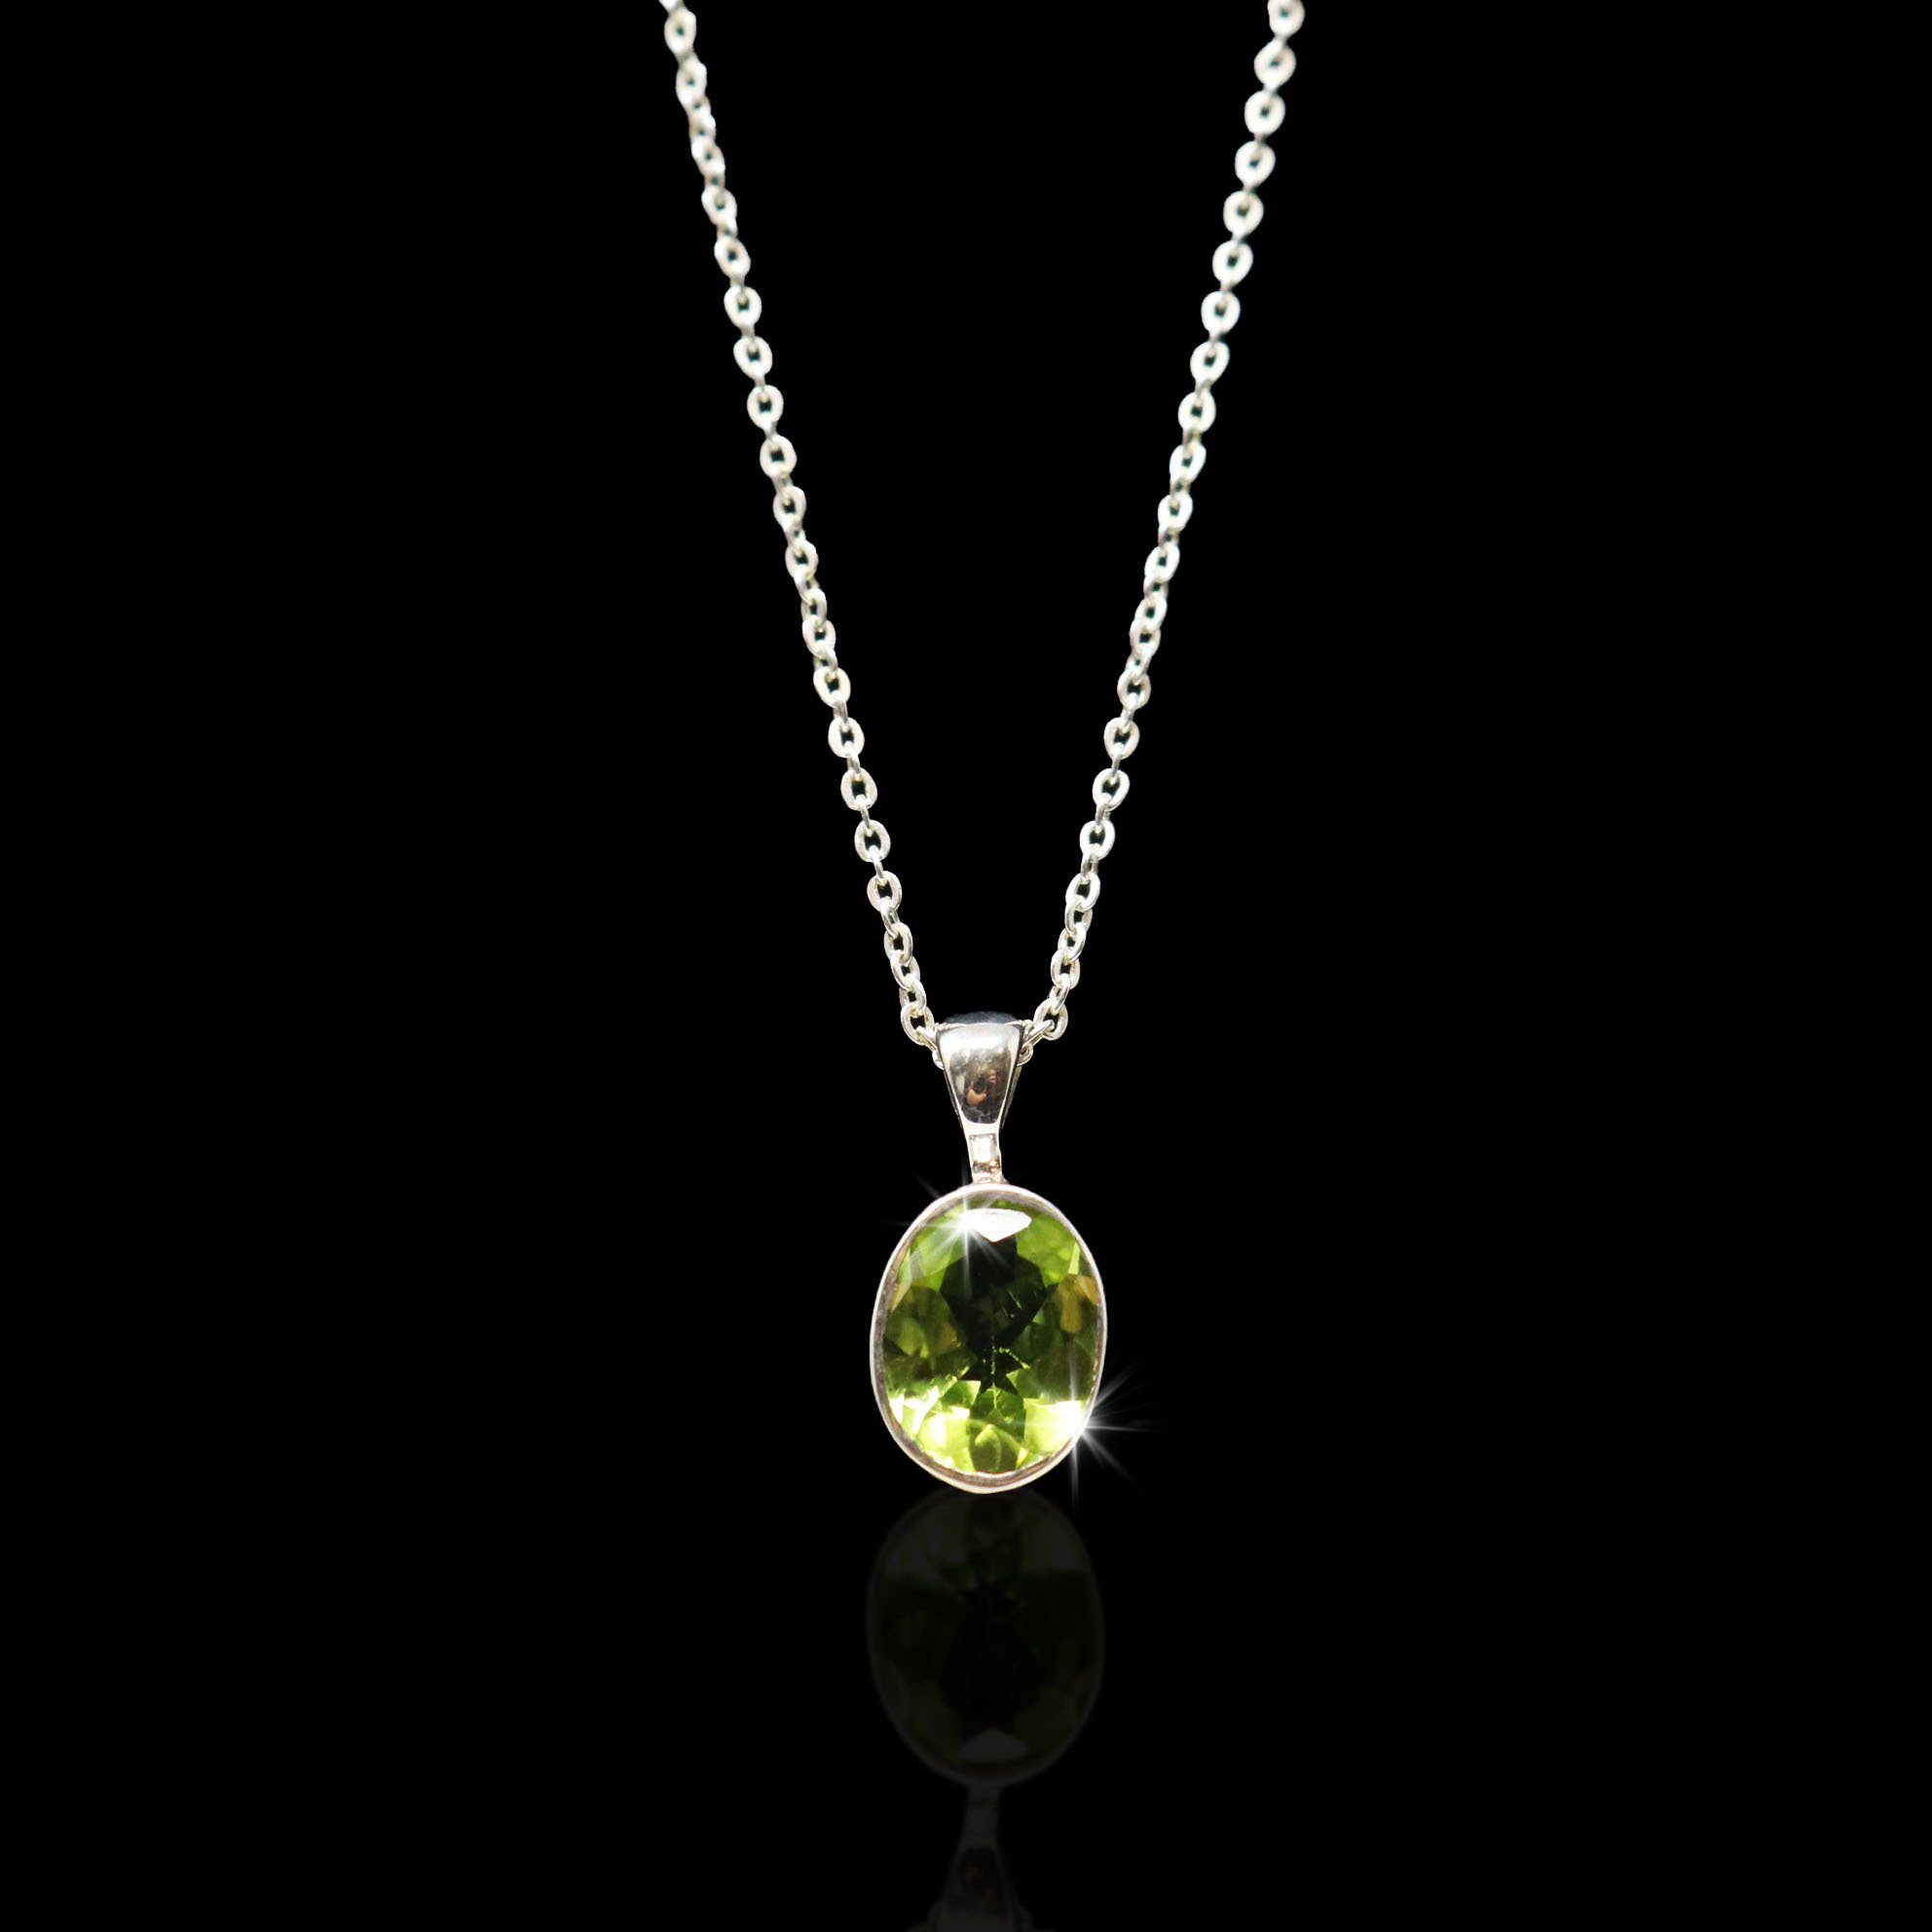 Peridot Necklace - Dainty Faceted Oval With Silver Bezel